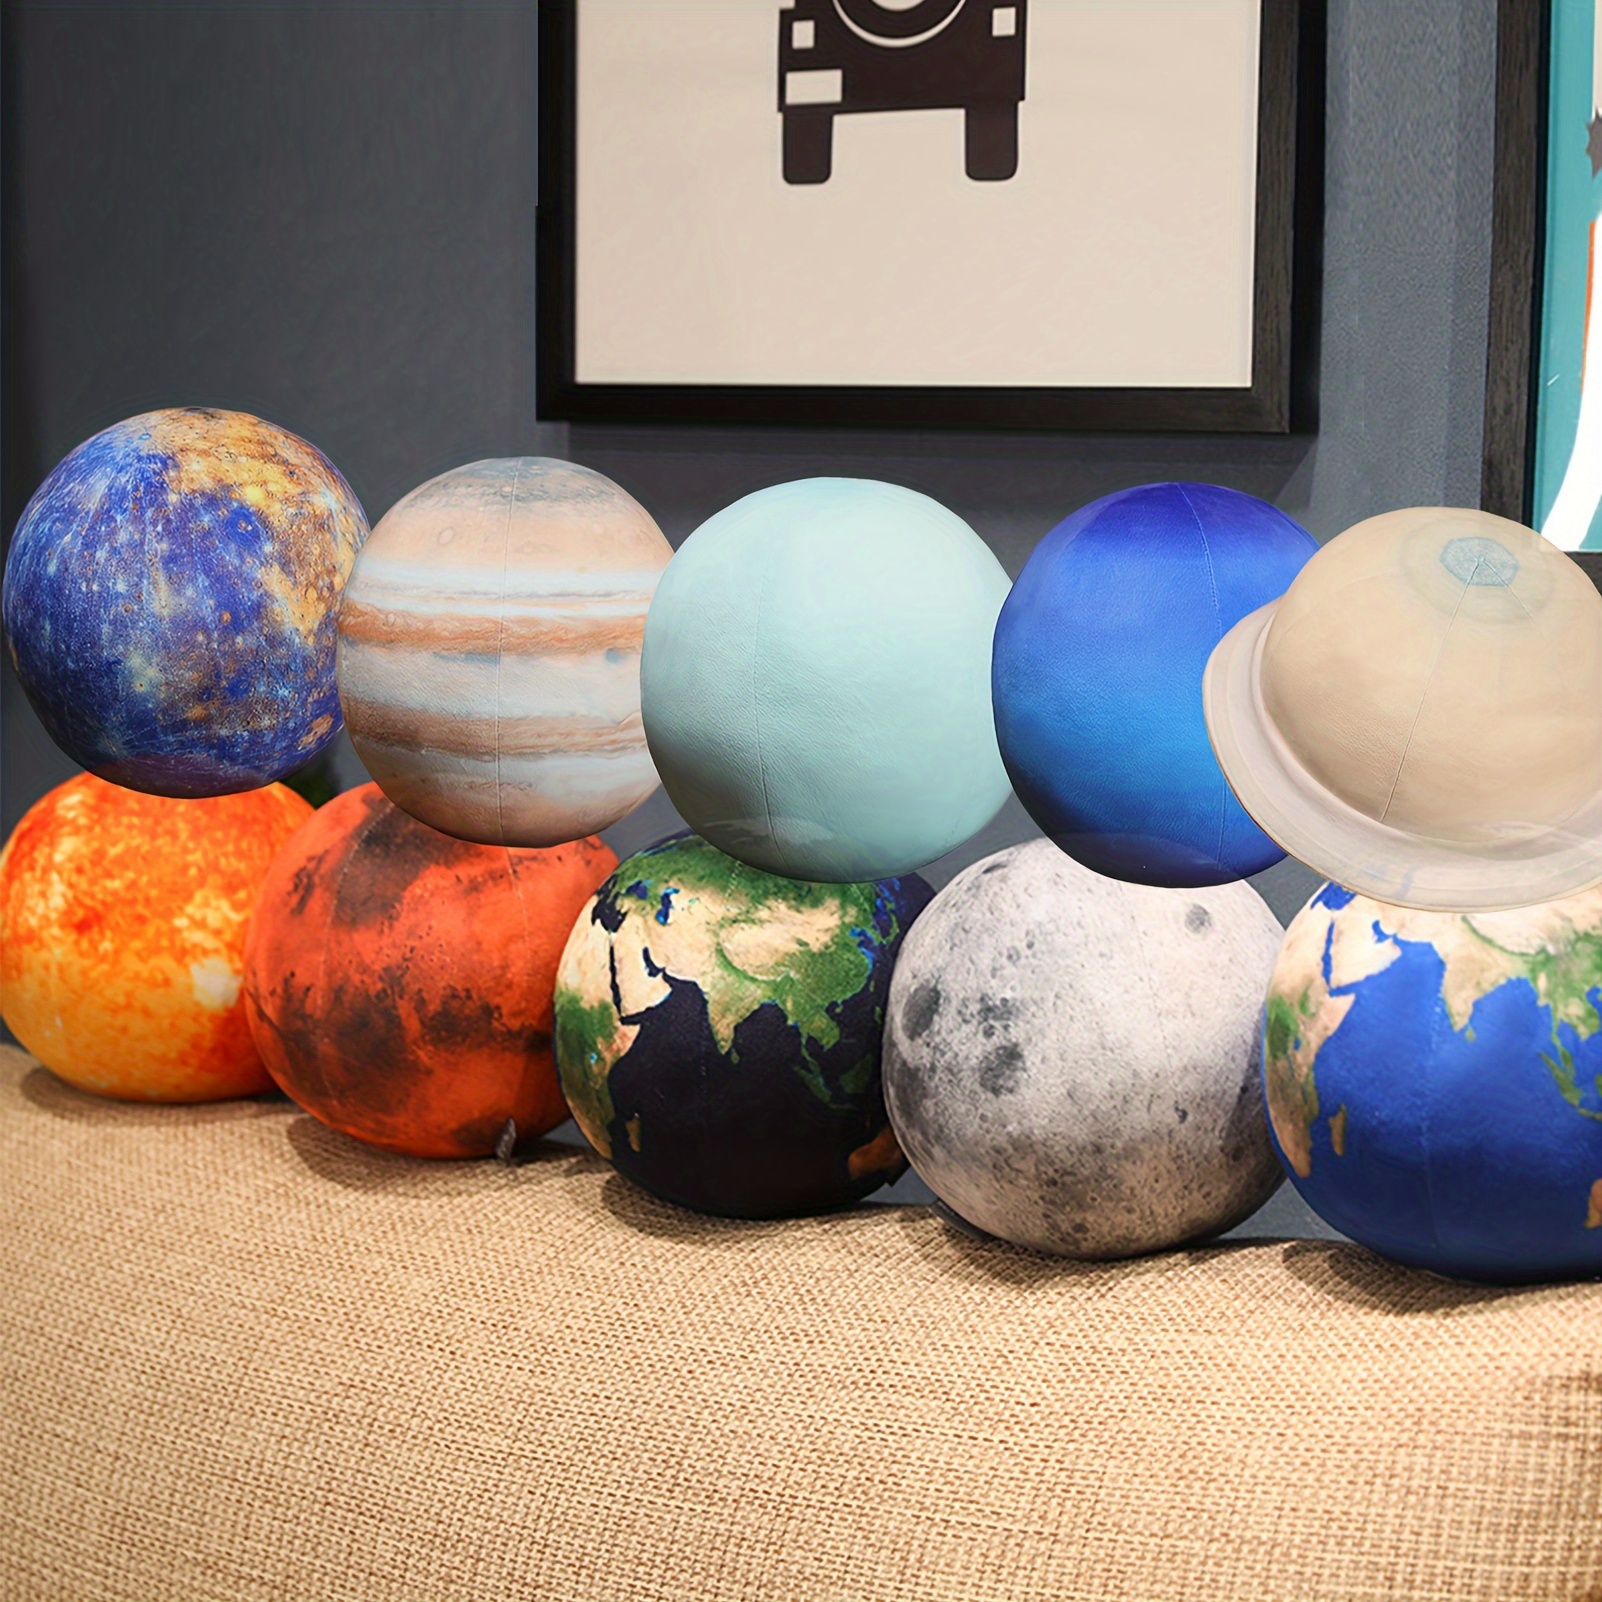 

Solar System Plush Pillow Covers - Space-themed Cushions For Kids' Room Decor, Soft Fabric, 2 Sizes Available Pillows For Couch Pillows For Kids